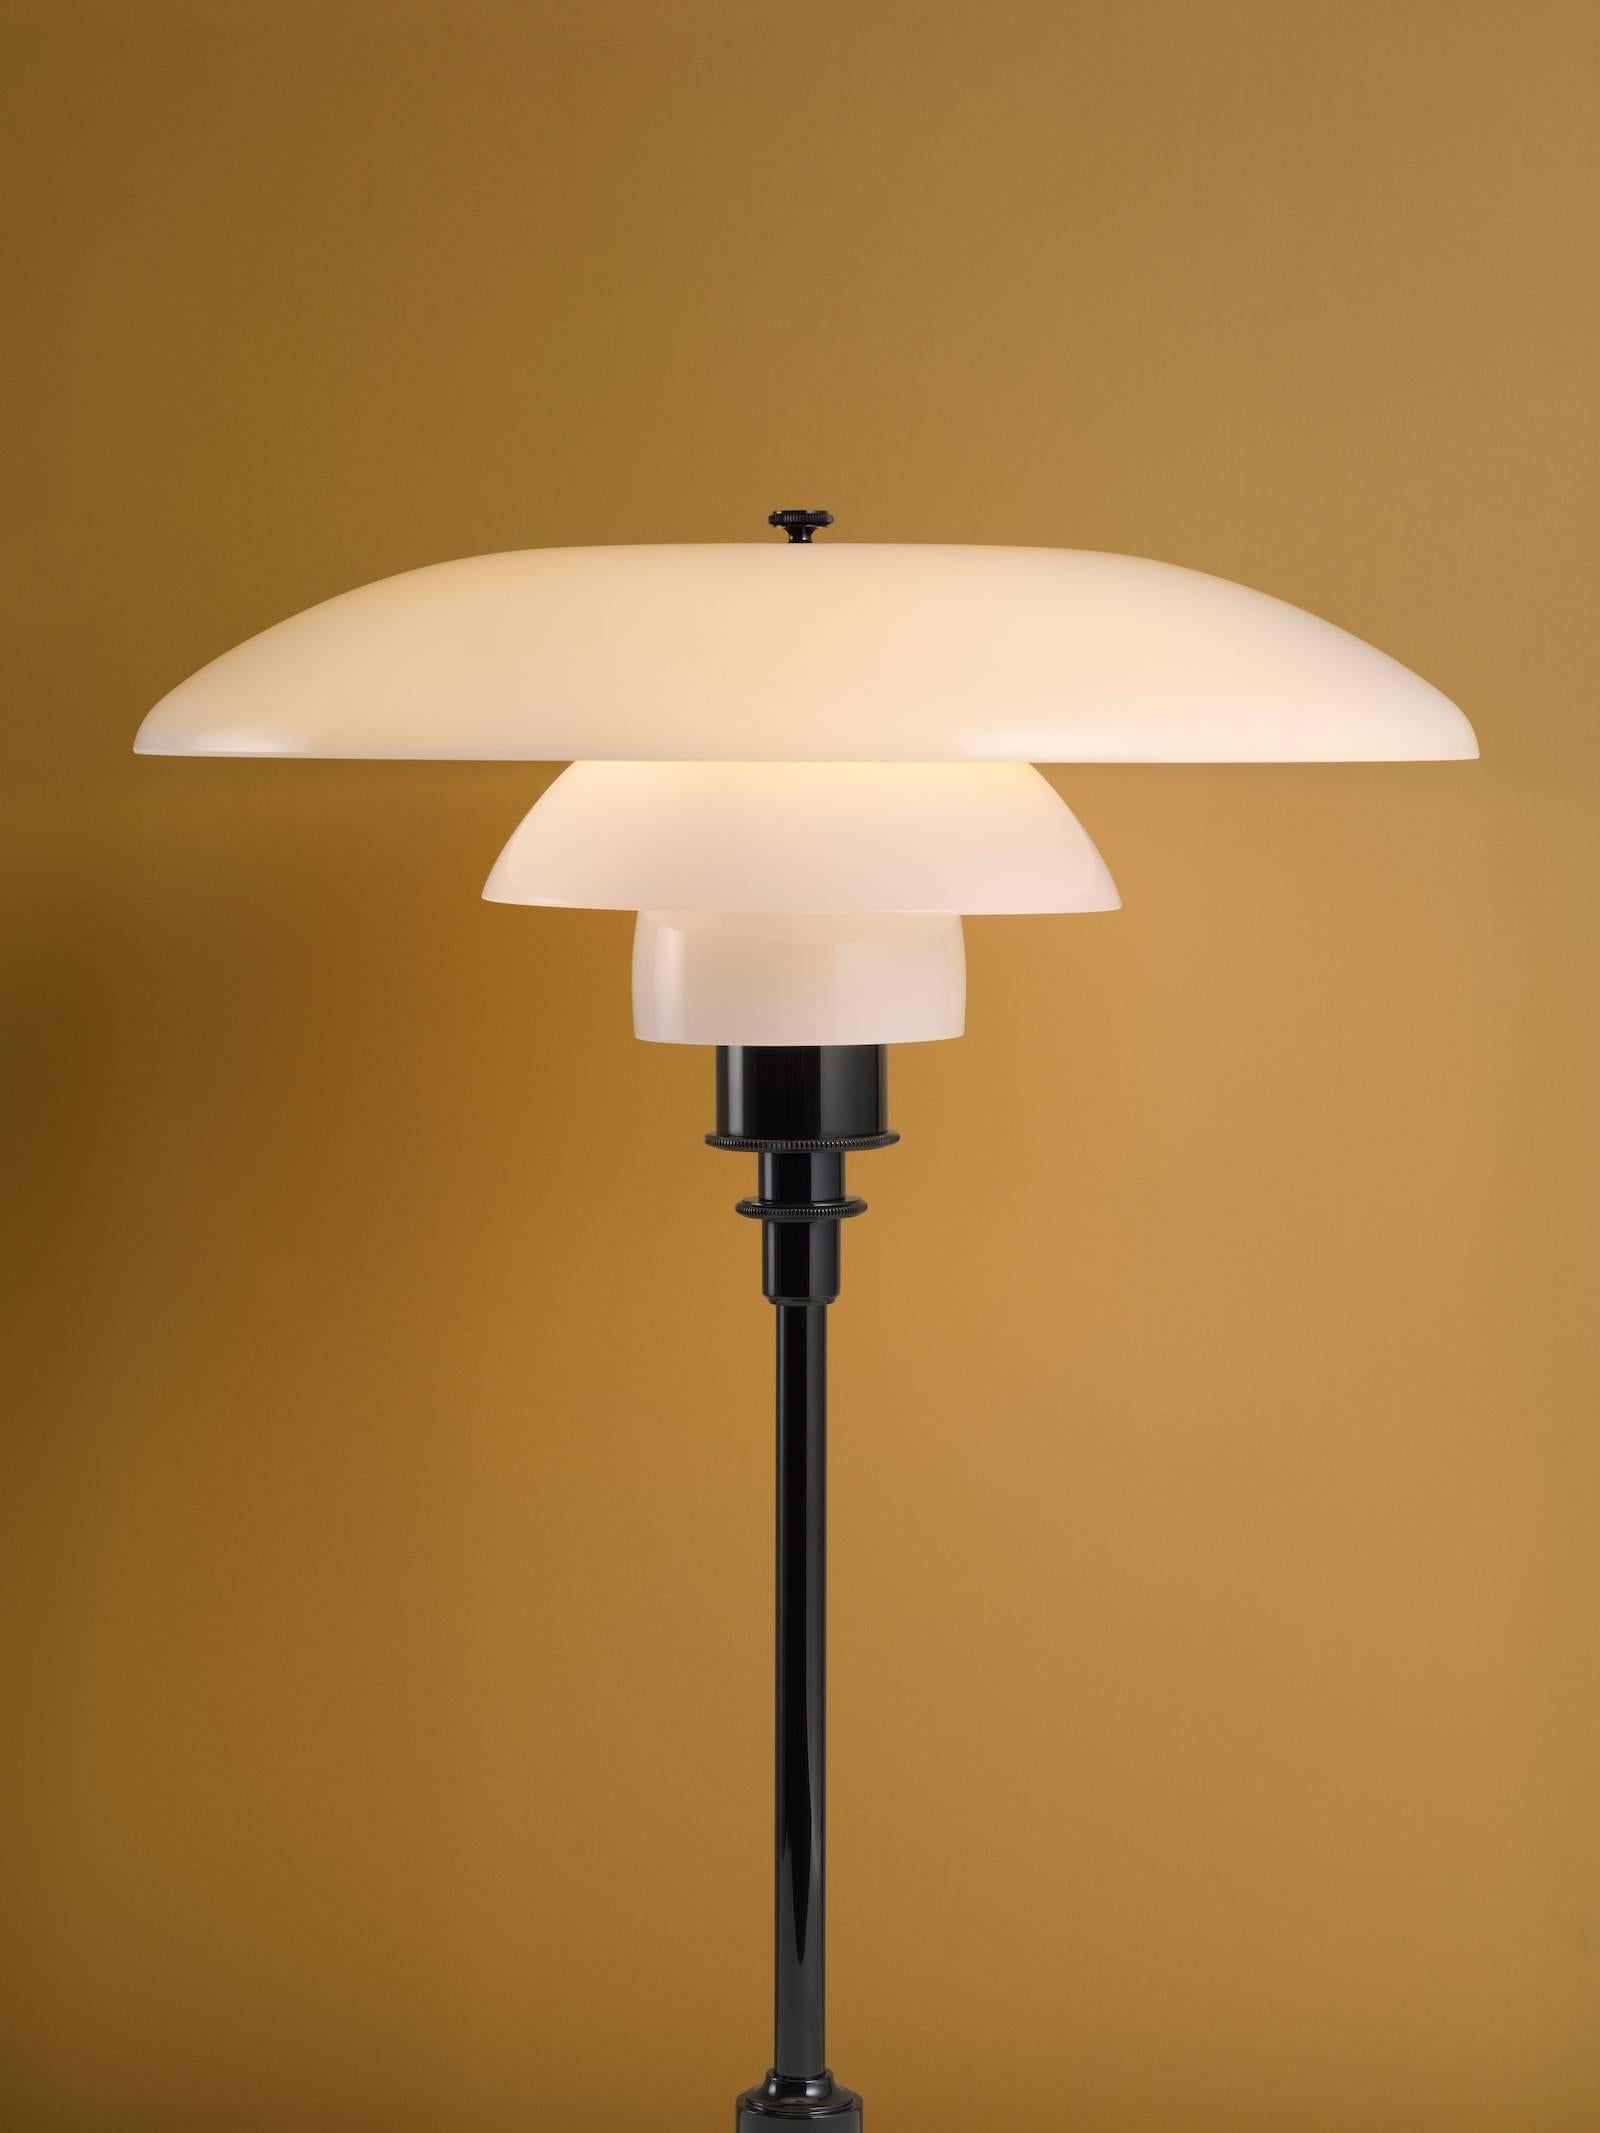 Poul Henningsen opaline glass PH 3½-2½ table lamp for Louis Poulsen. Executed in white opal glass and a chrome or black metallised frame. The Industrial look of the dark metallised surface offers a bold, understated look. The mouth-blown white opal